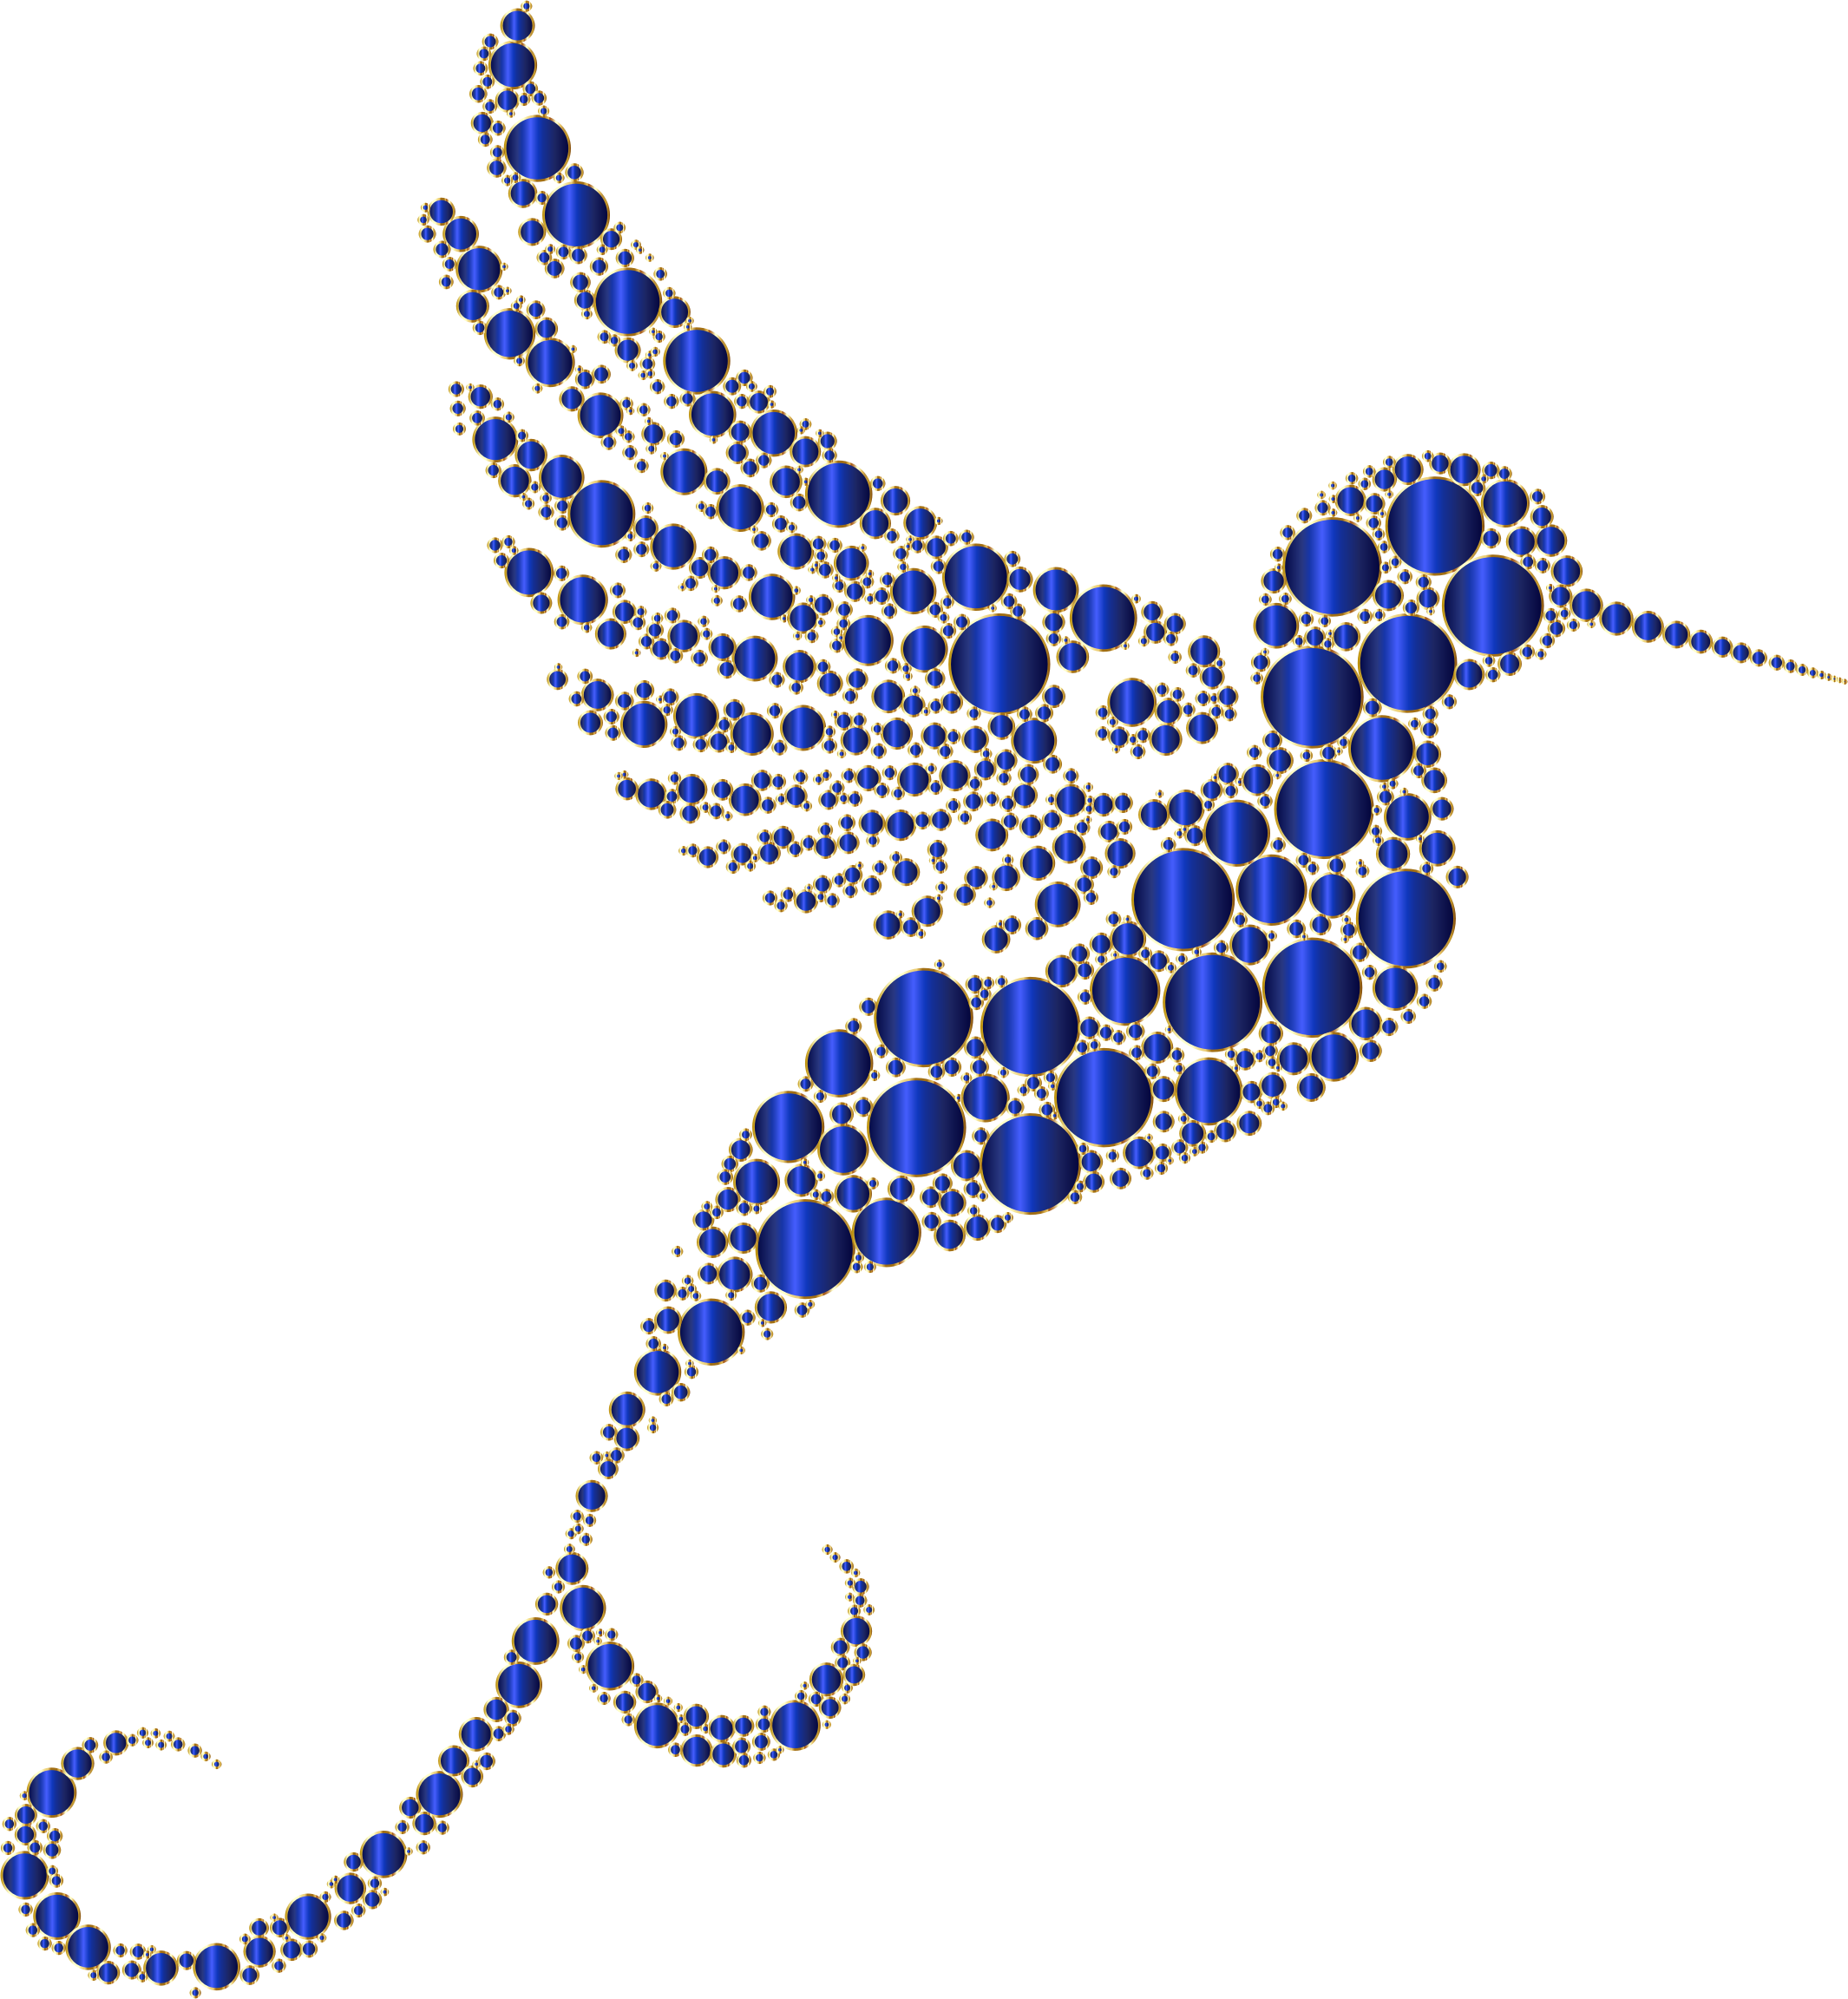 Volare Silhouette Hummingbird PNG PIC